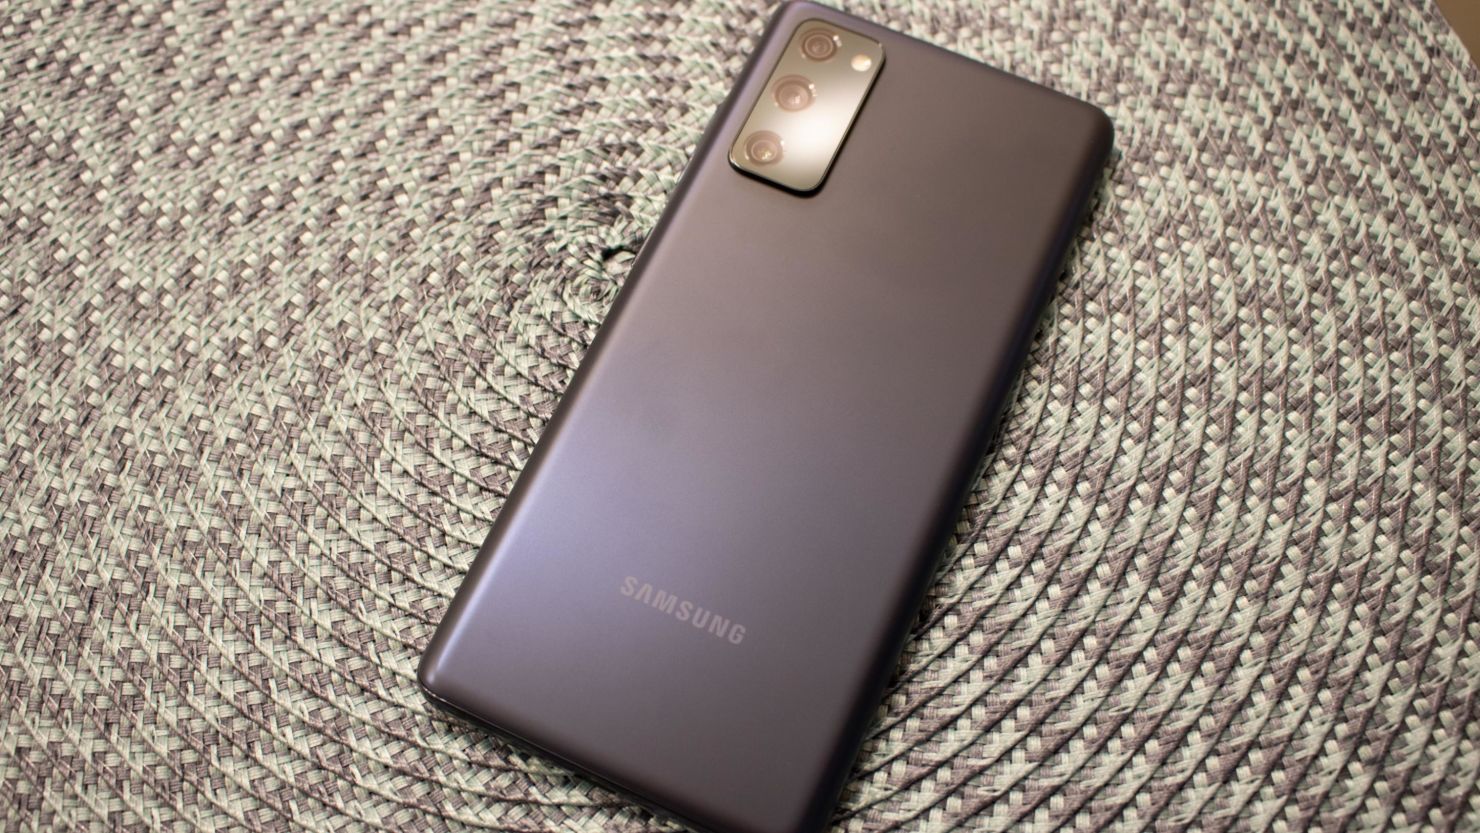 The New Samsung Galaxy S20 FE has dropped and we're thinking of